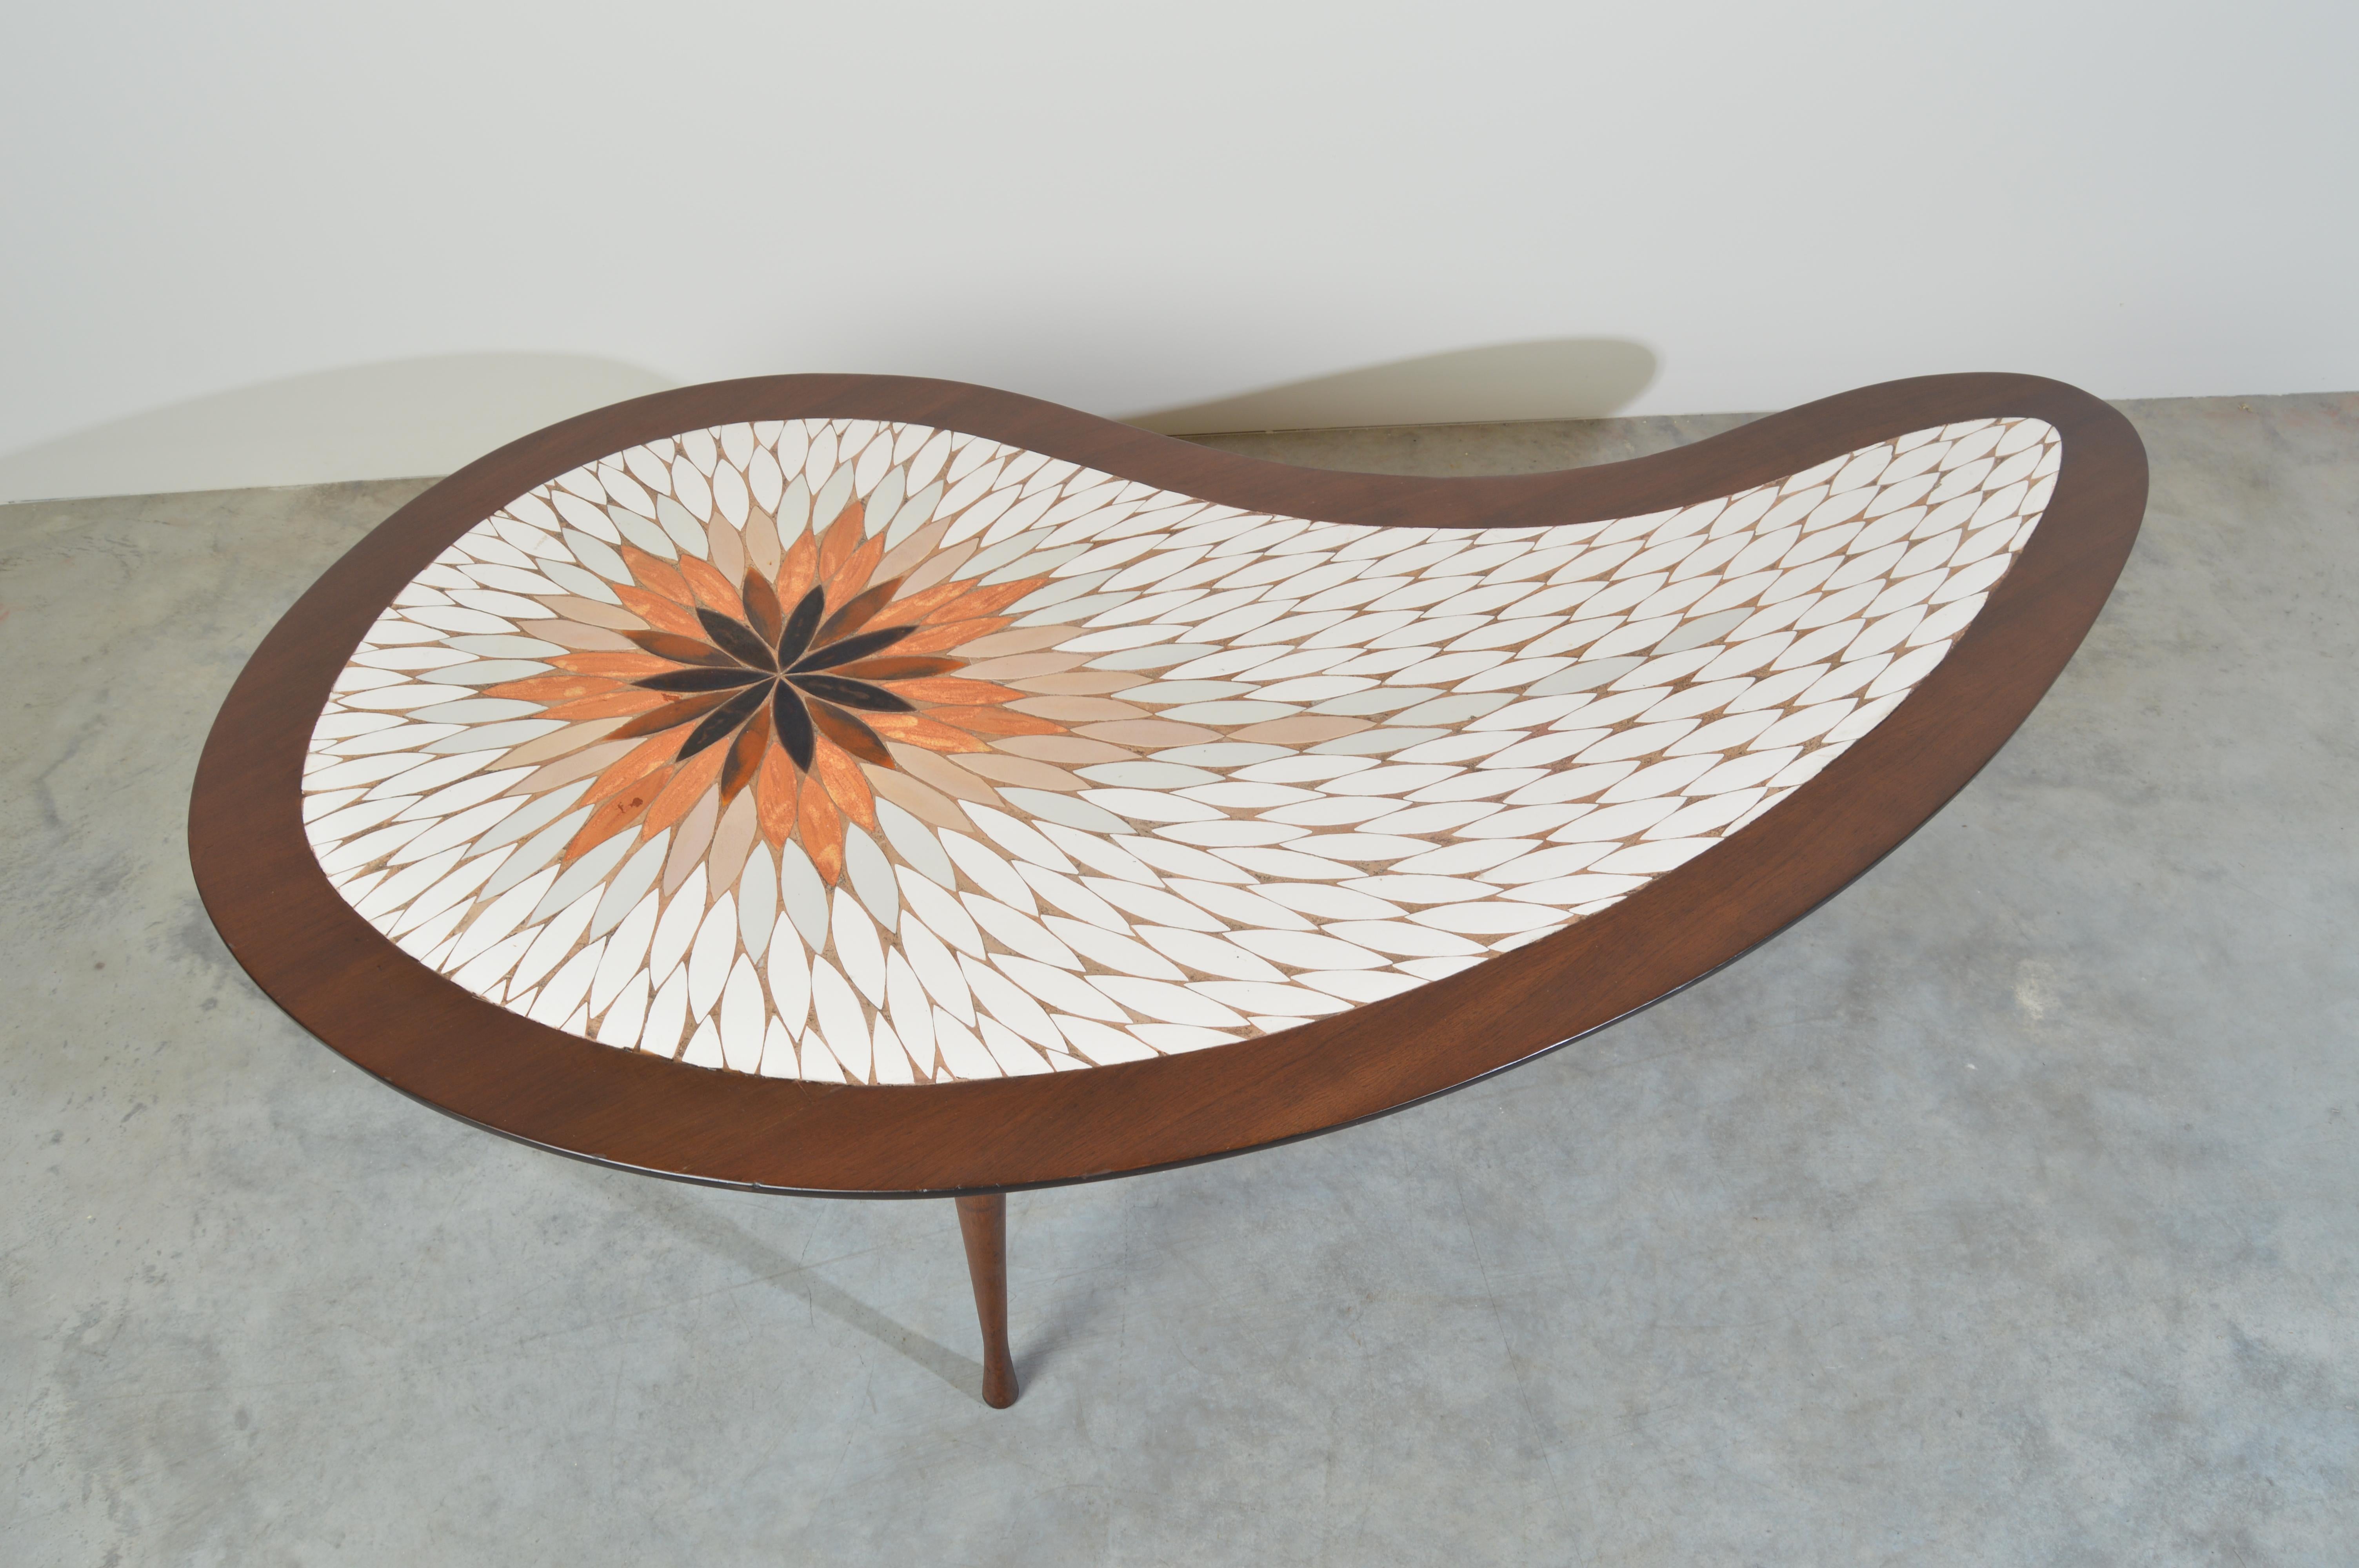 Porcelain Midcentury Kidney Shaped Mosaic Coffee Table by Hohenberg Originals